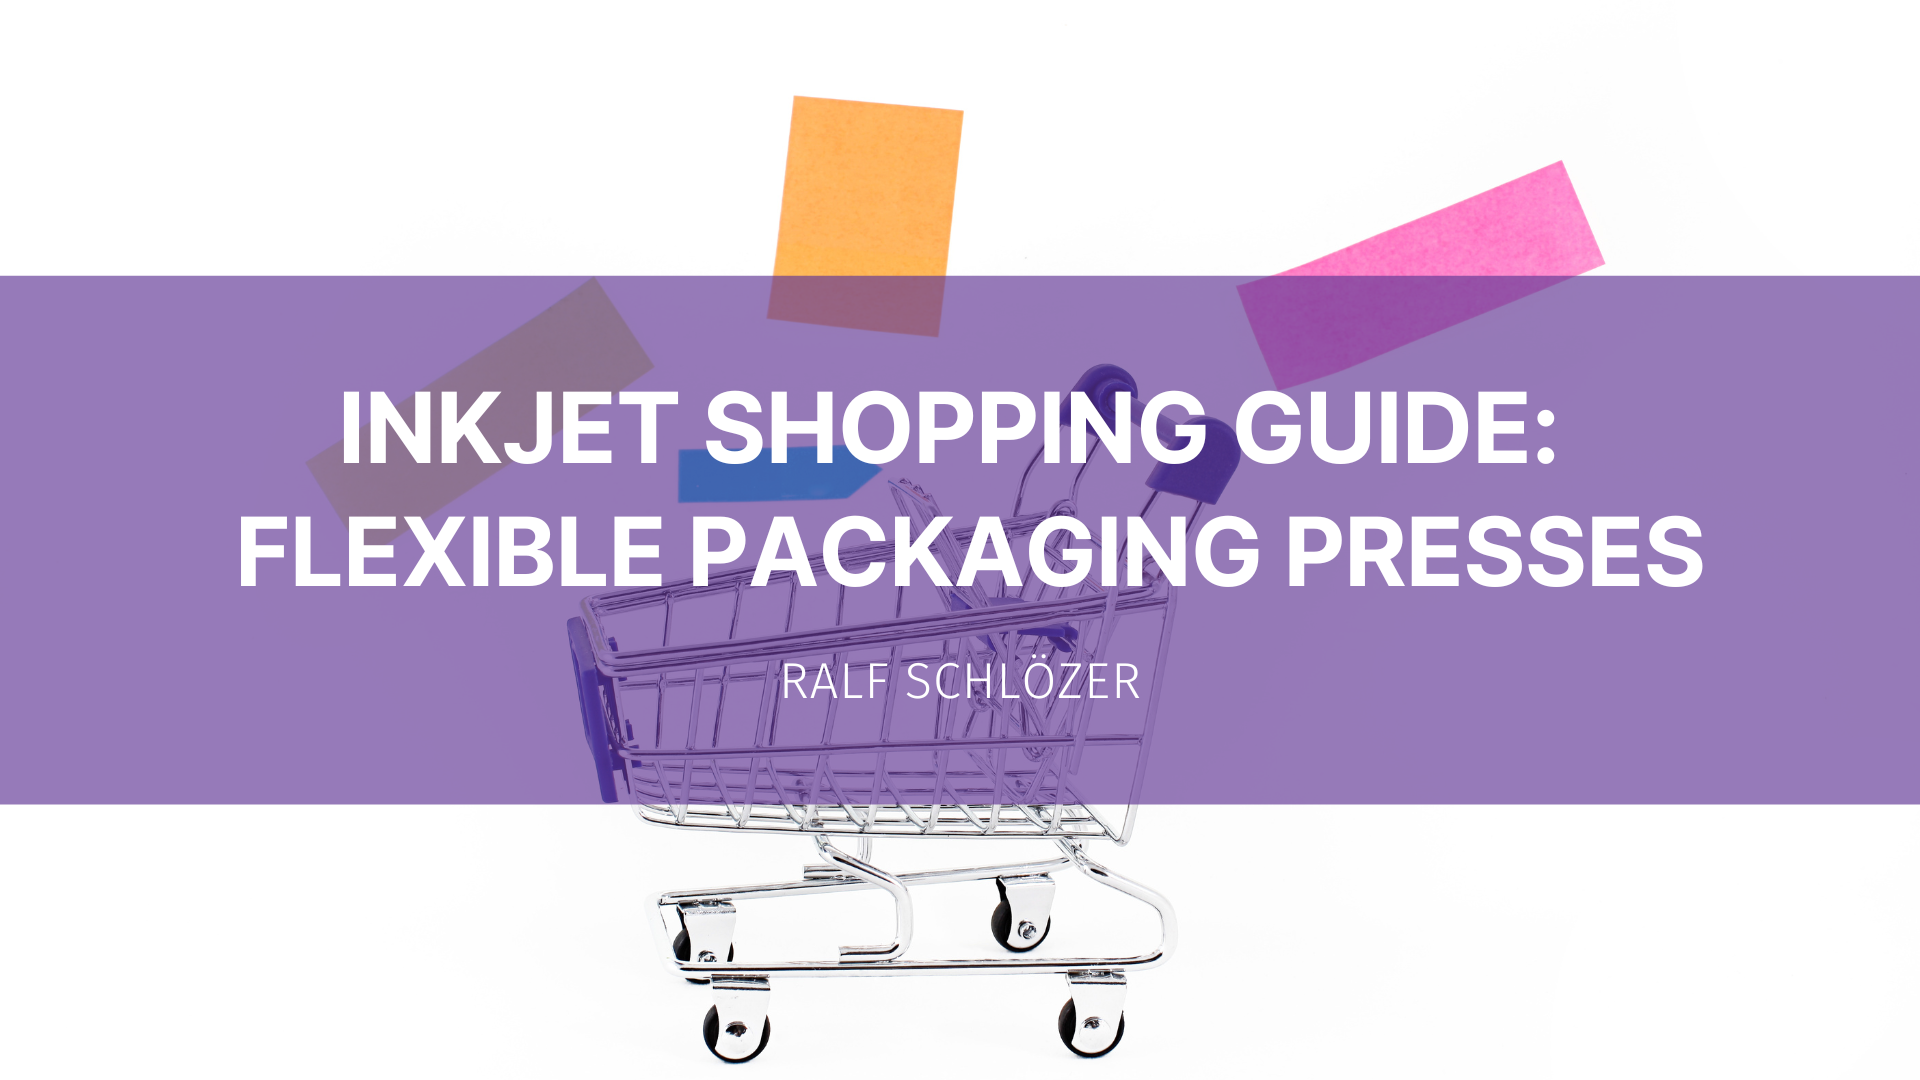 Featured image for “Inkjet Shopping Guide for Flexible Packaging Presses”